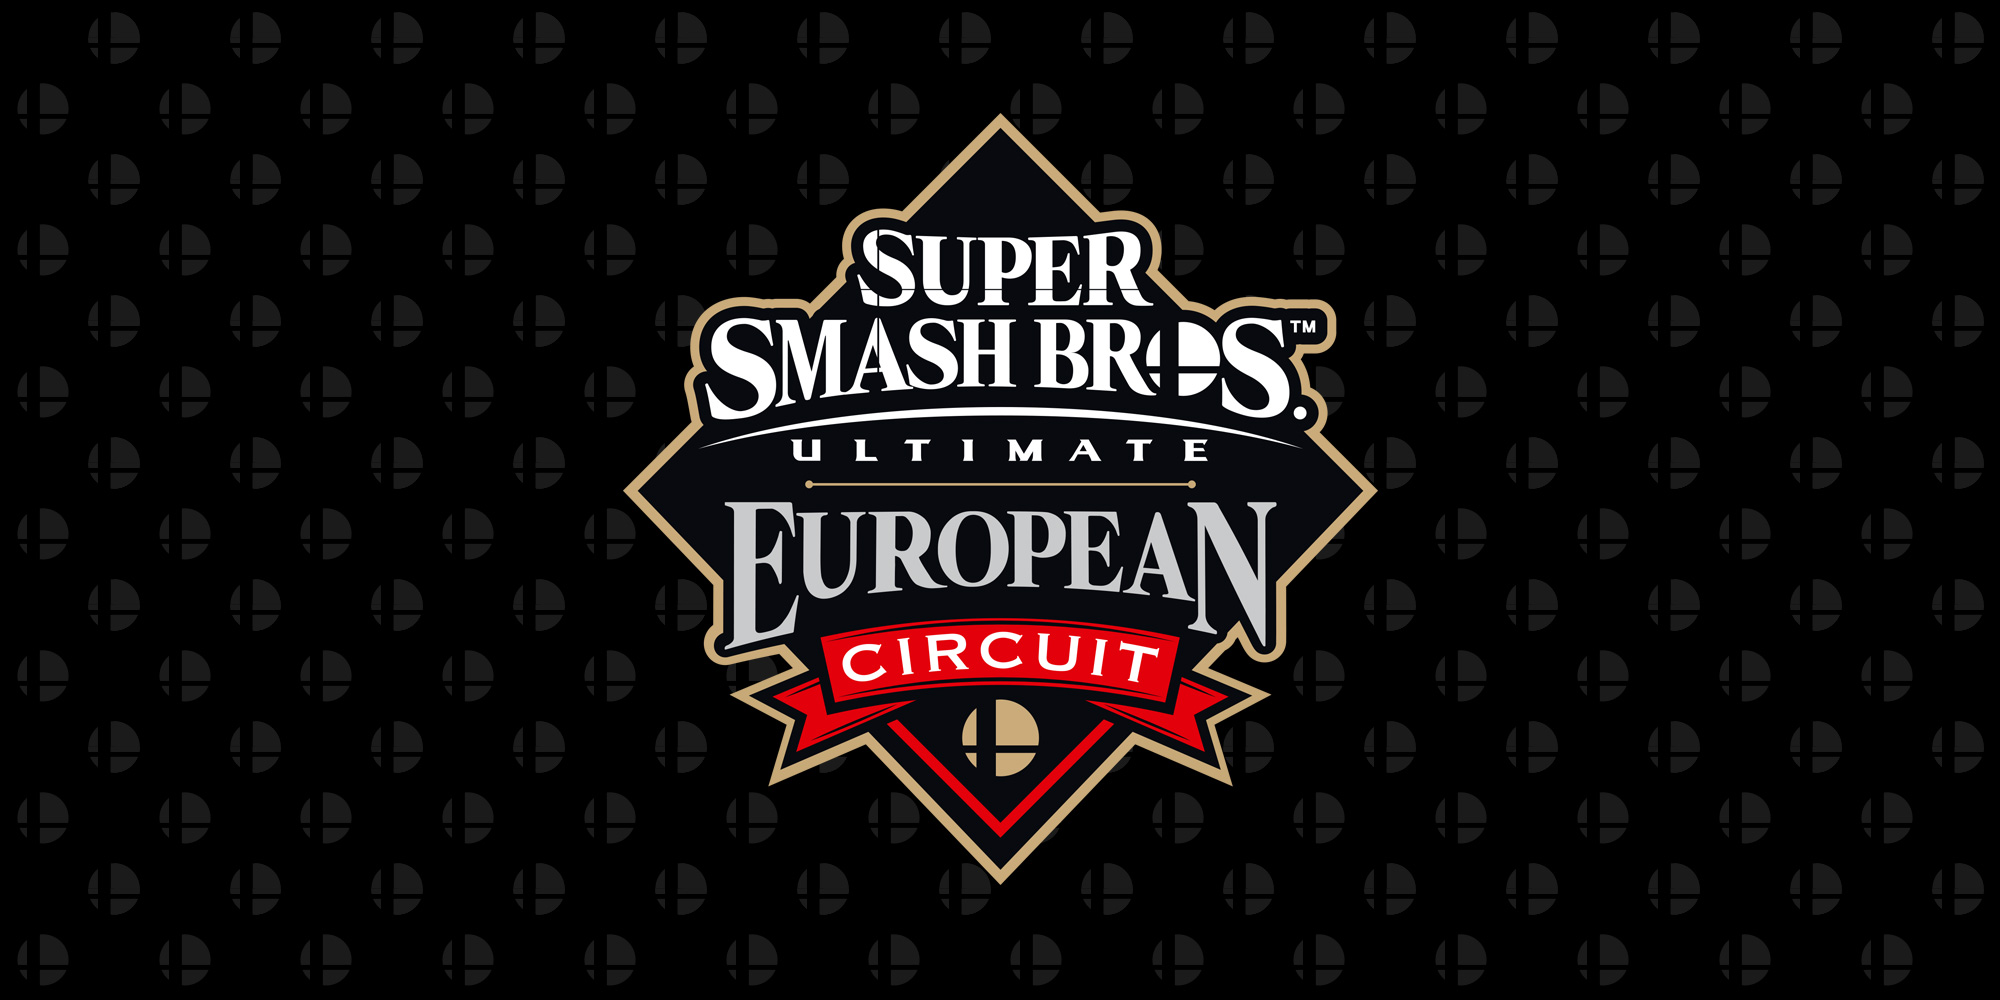 Glutonny is your Valhalla III champion – the third event of the Super Smash Bros. Ultimate European Circuit!